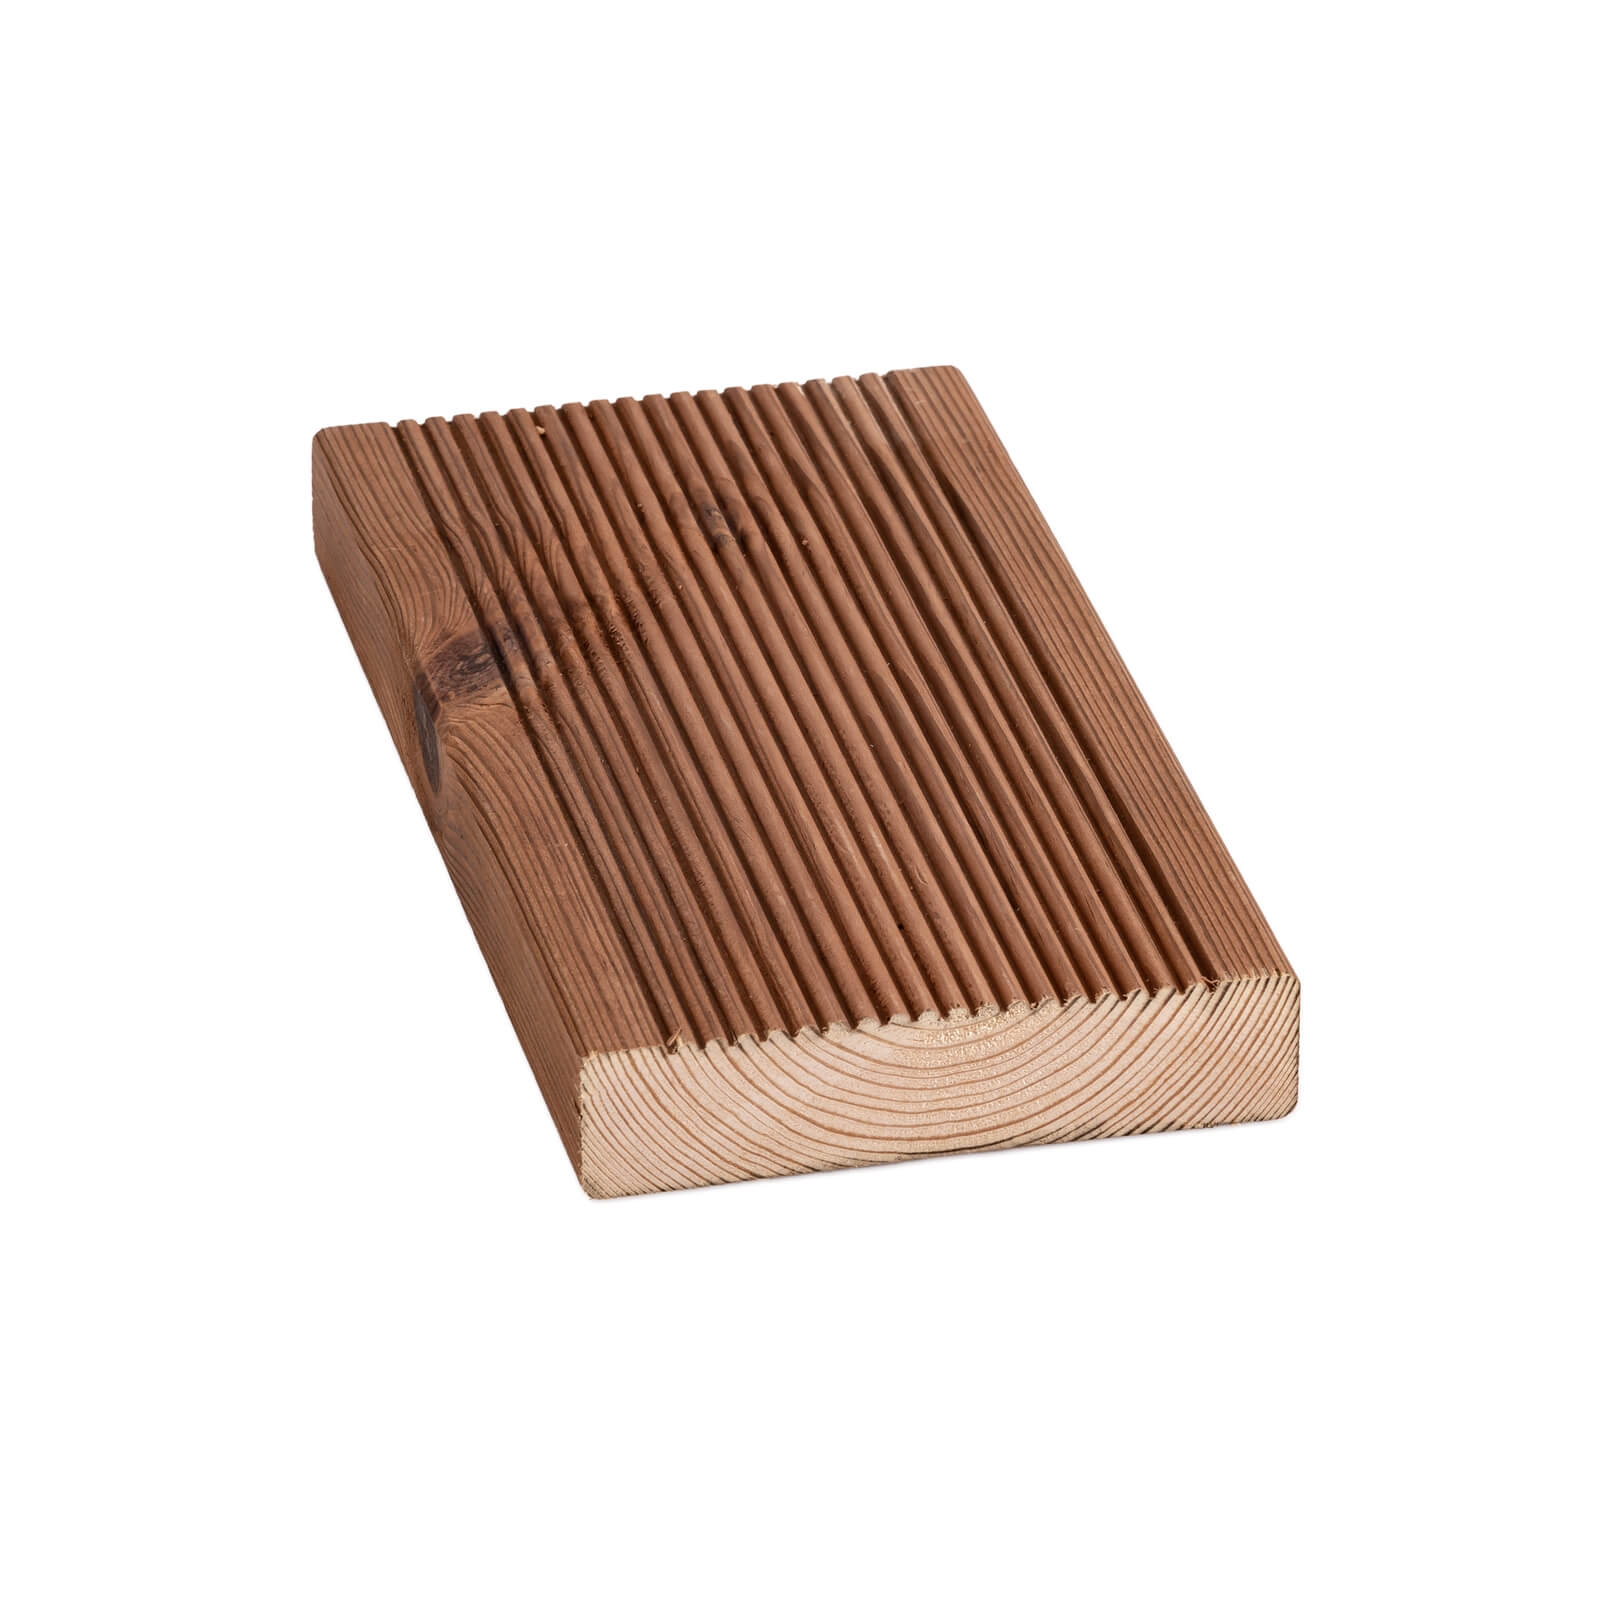 Softwood Timber Brown Decking  28x120x3.0mtr (Pack of 4)